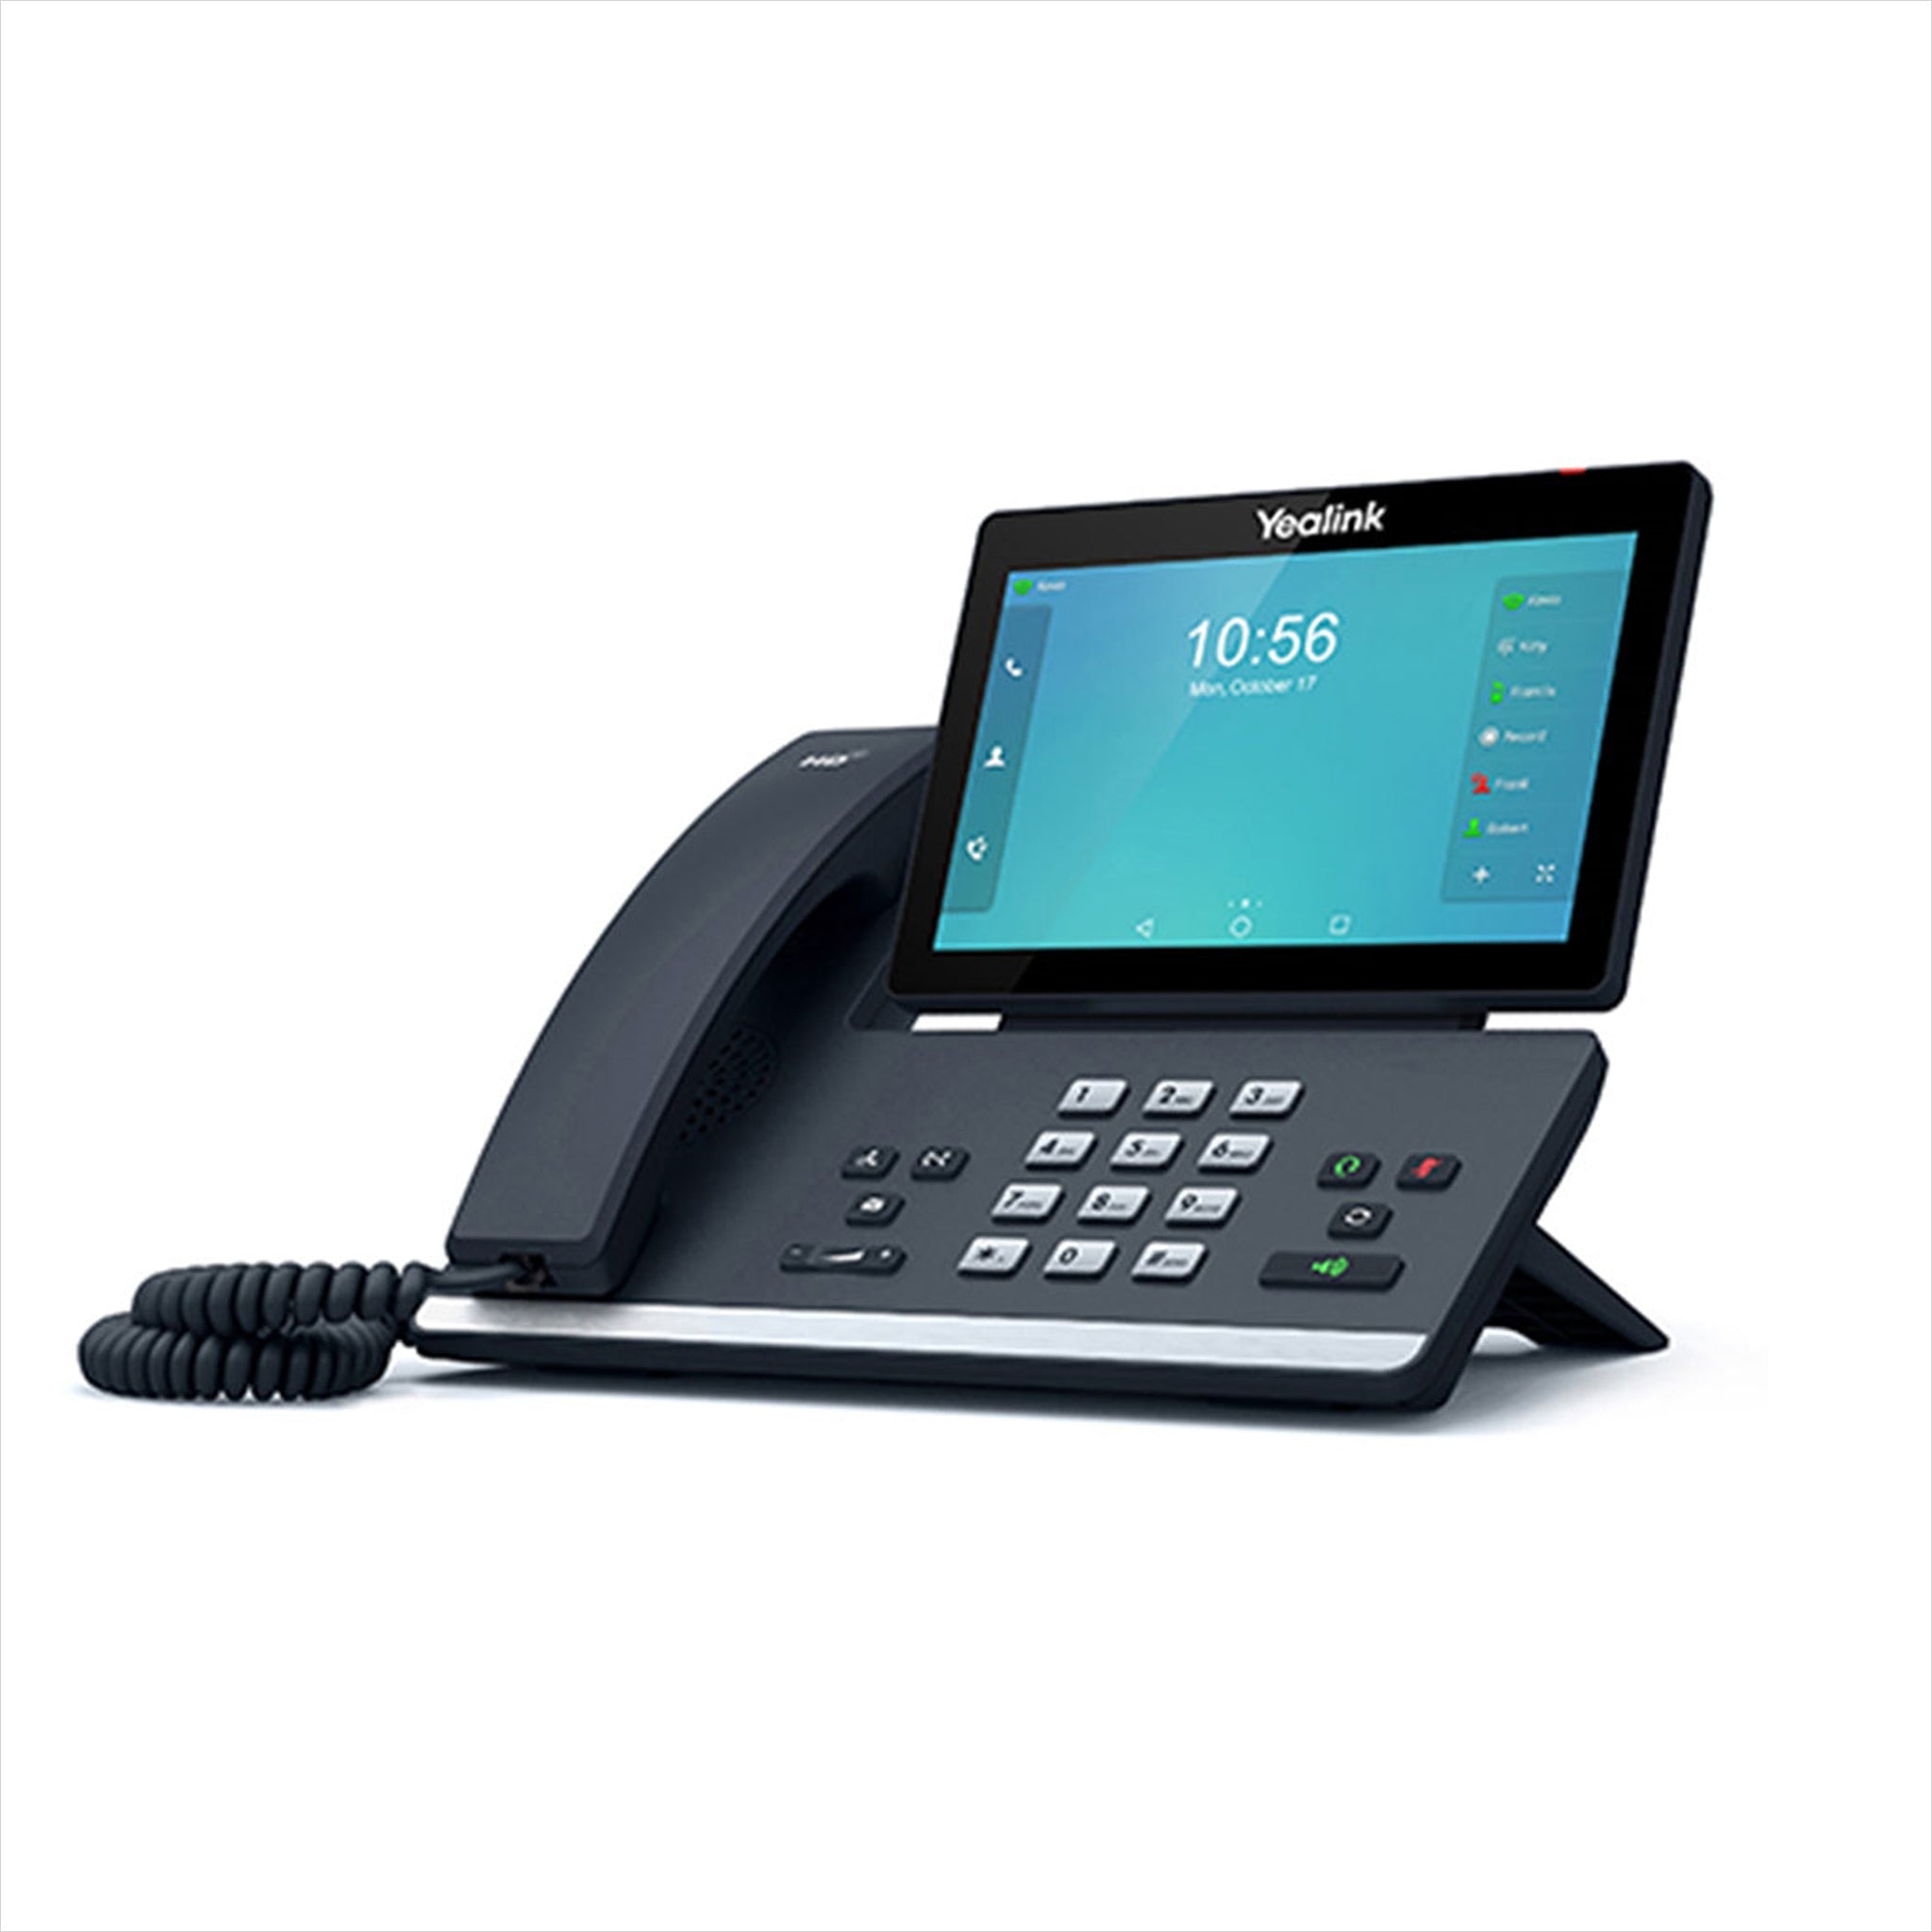 Yealink T56A - SIP Smart Media IP Phone T56A, Built-in Bluetooth | AL-VoIP Store